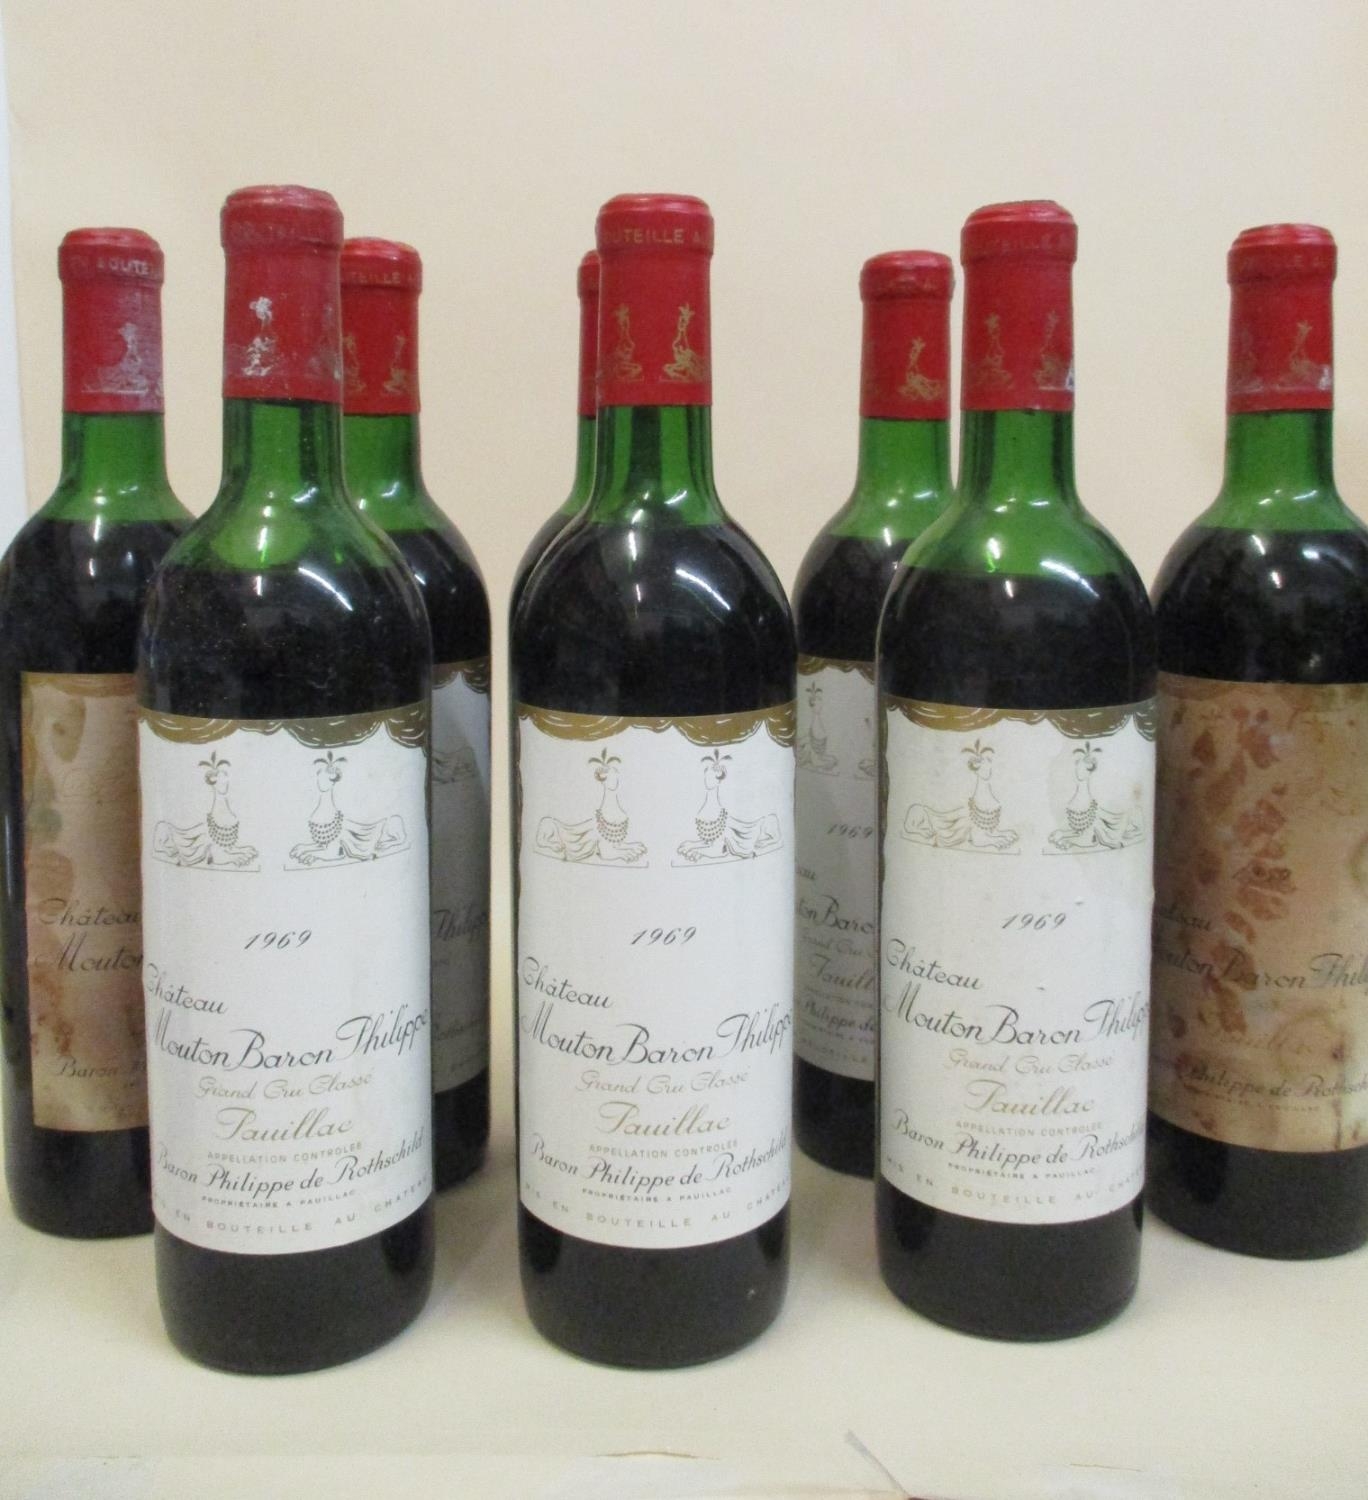 Eight bottles of Chateau Mouton Baron Philippe Grand Cru Classe Pauillac 1969 (two stained labels)